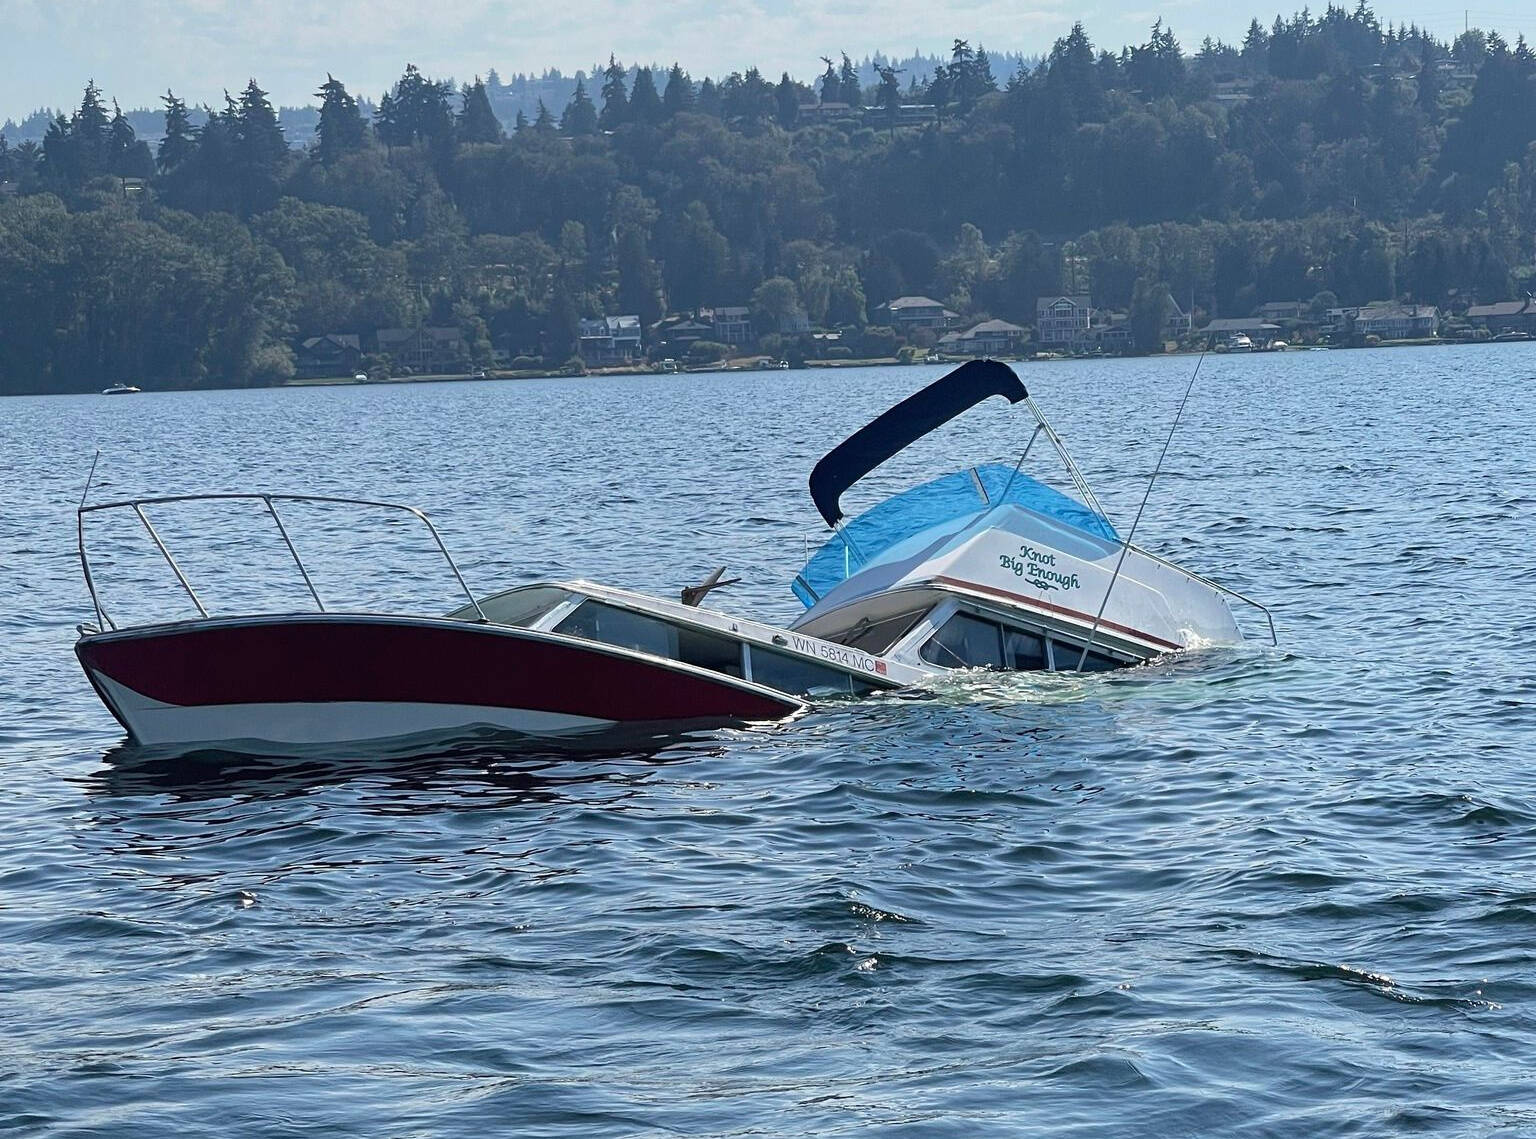 The Mercer Island Police Department Marine Patrol has declared this vessel, which was located on Aug. 31, as derelict or abandoned. Photo courtesy of the Mercer Island Police Department